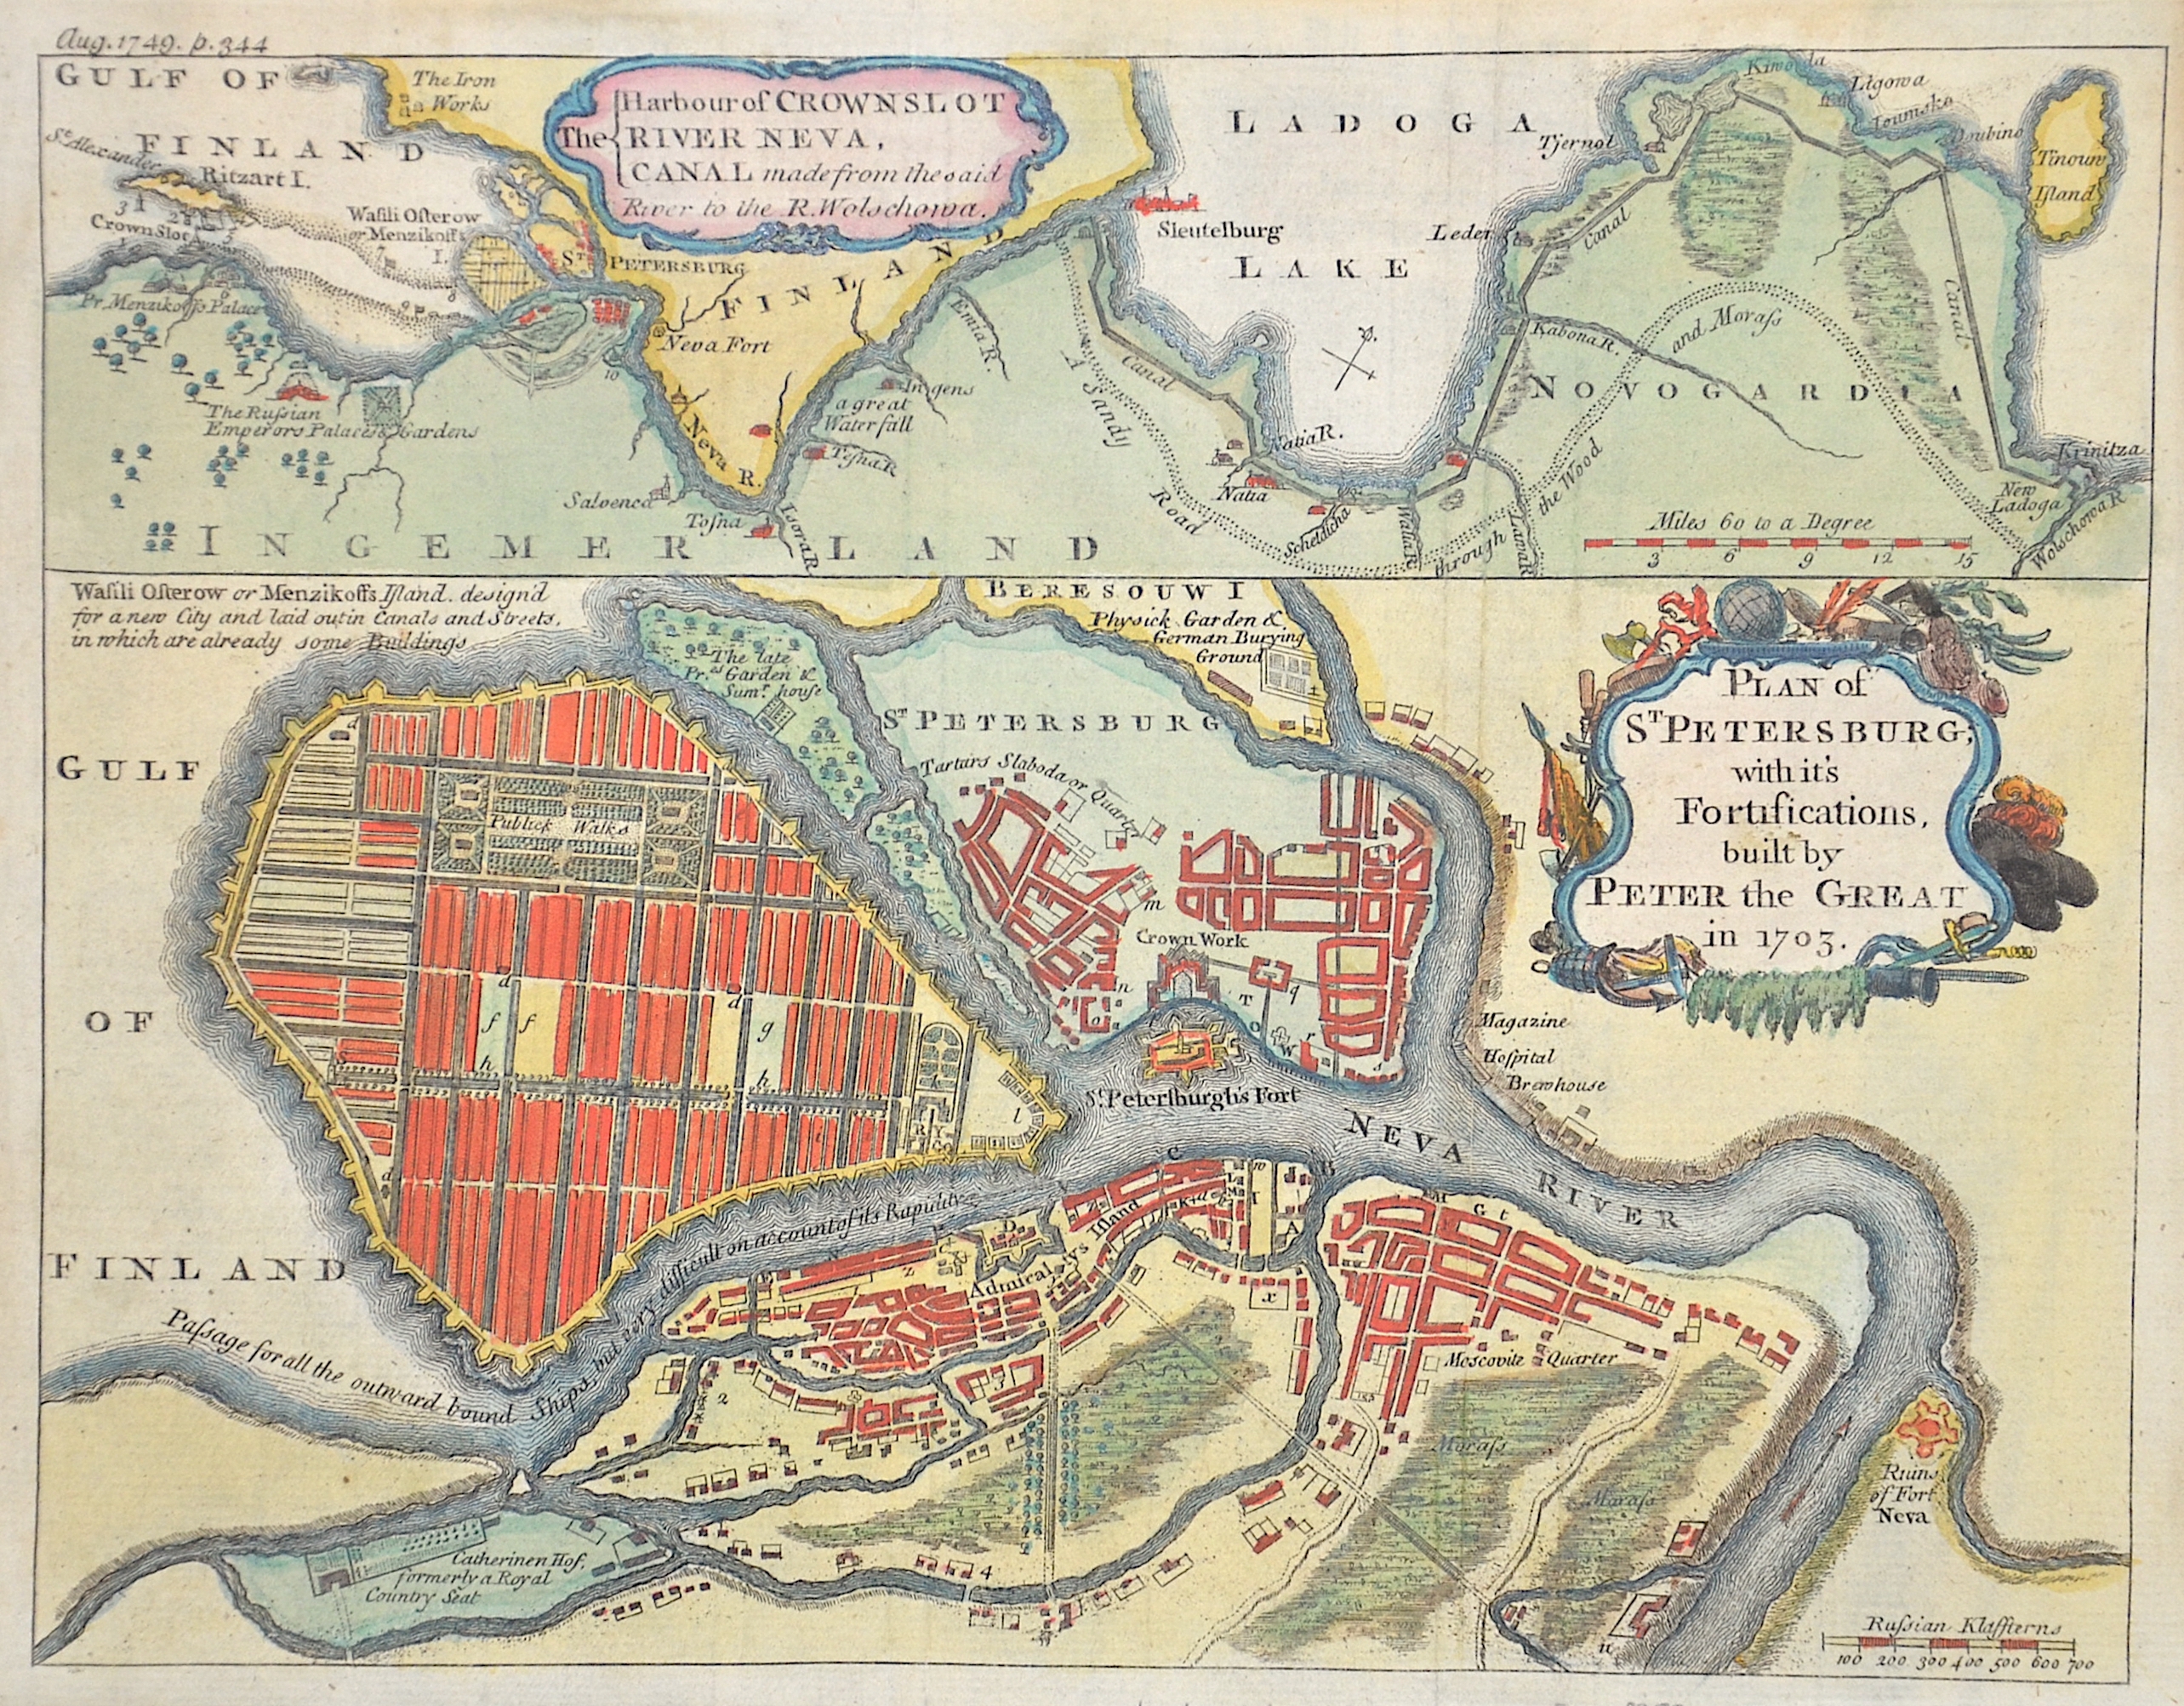 Anonymus  Plan of St. Petersburg with it´s Fortifications built by Peter the Great in 1703/ The harbour of Crownslot, River Neva